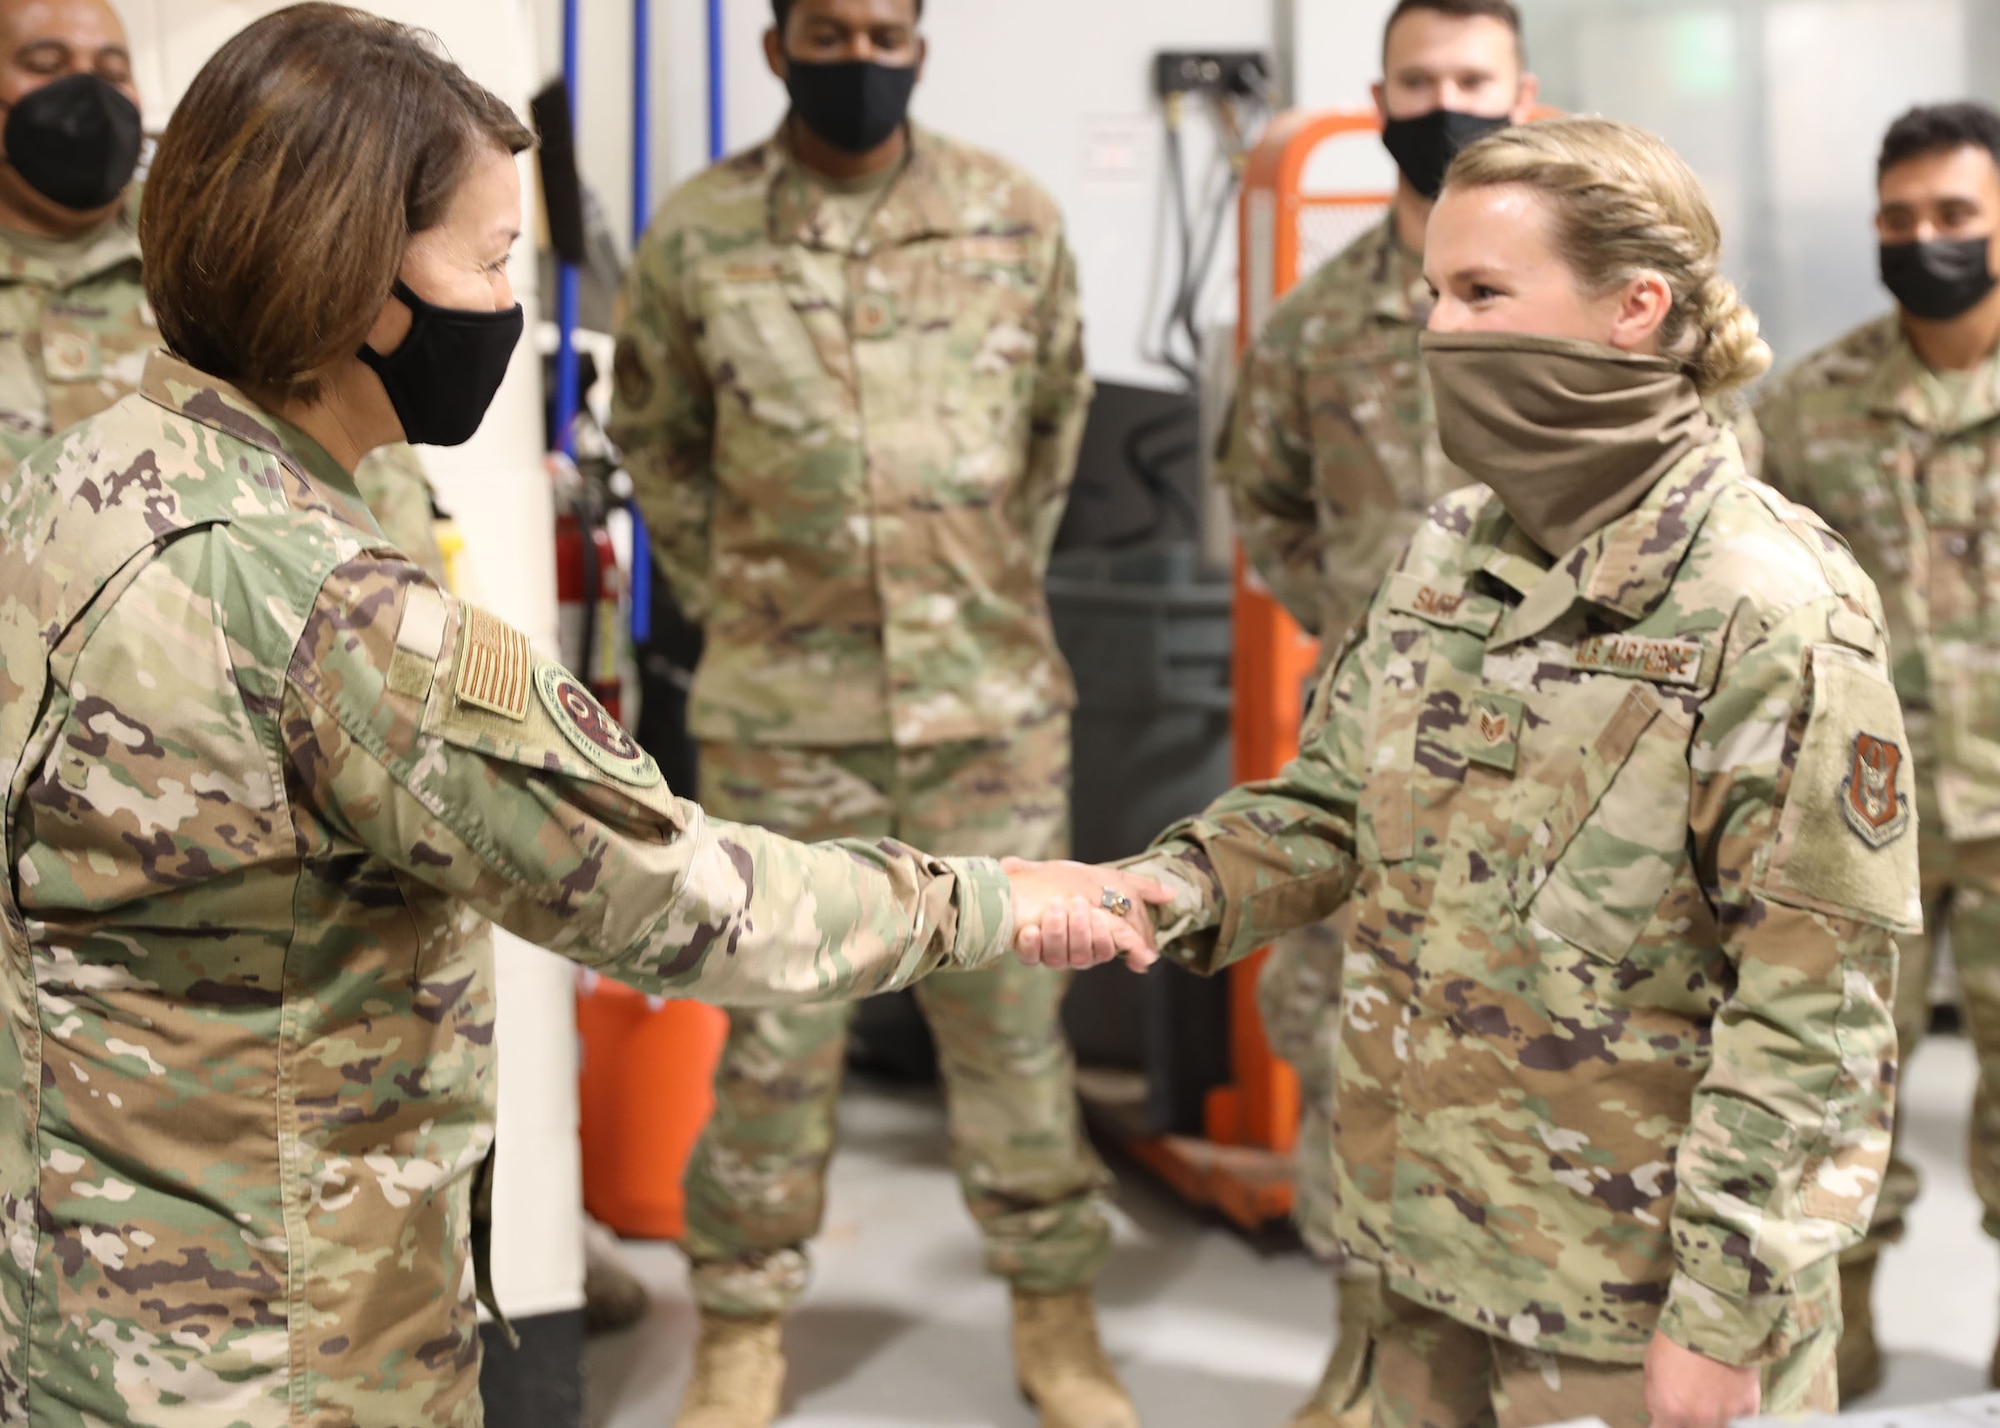 Staff Sgt. Leslie Smith, 445th Maintenance Squadron non-destructive inspection journeyman, is coined by Chief Master Sgt. of the Air Force JoAnne Bass Oct. 2, 2021, for being an exceptional performer in her unit.